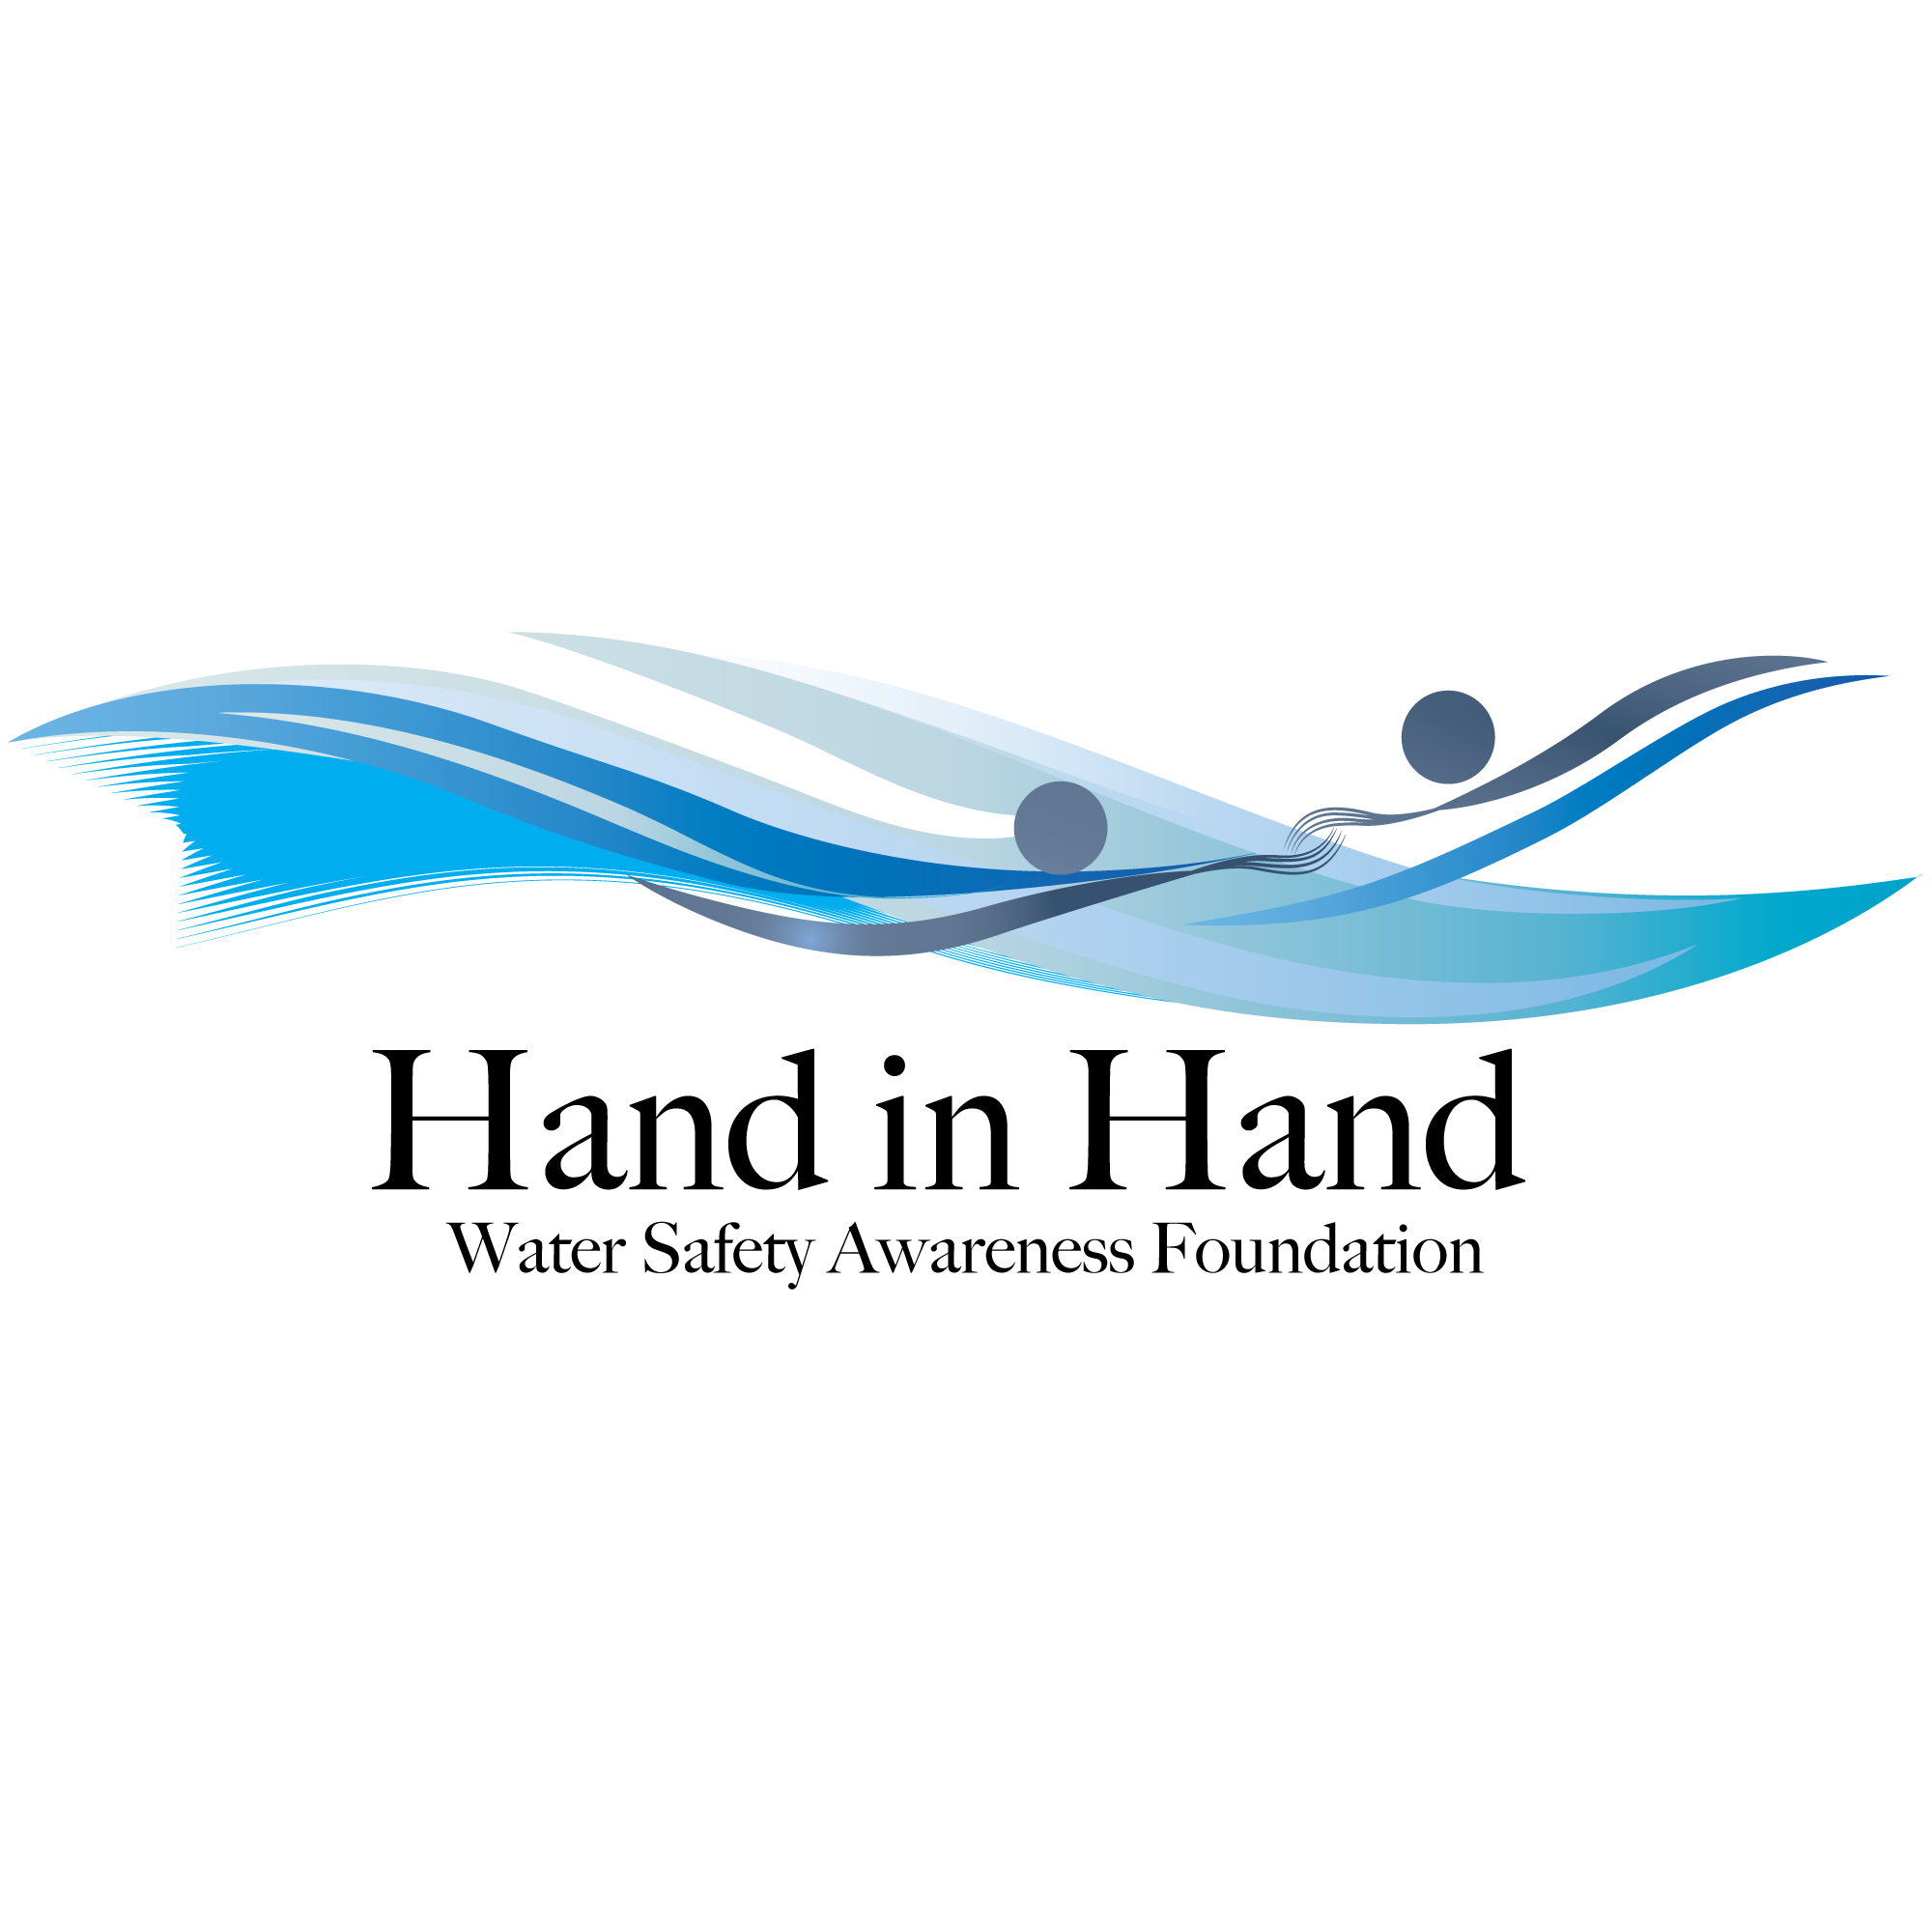 Hand in Hand Water Safety Awareness Foundation logo